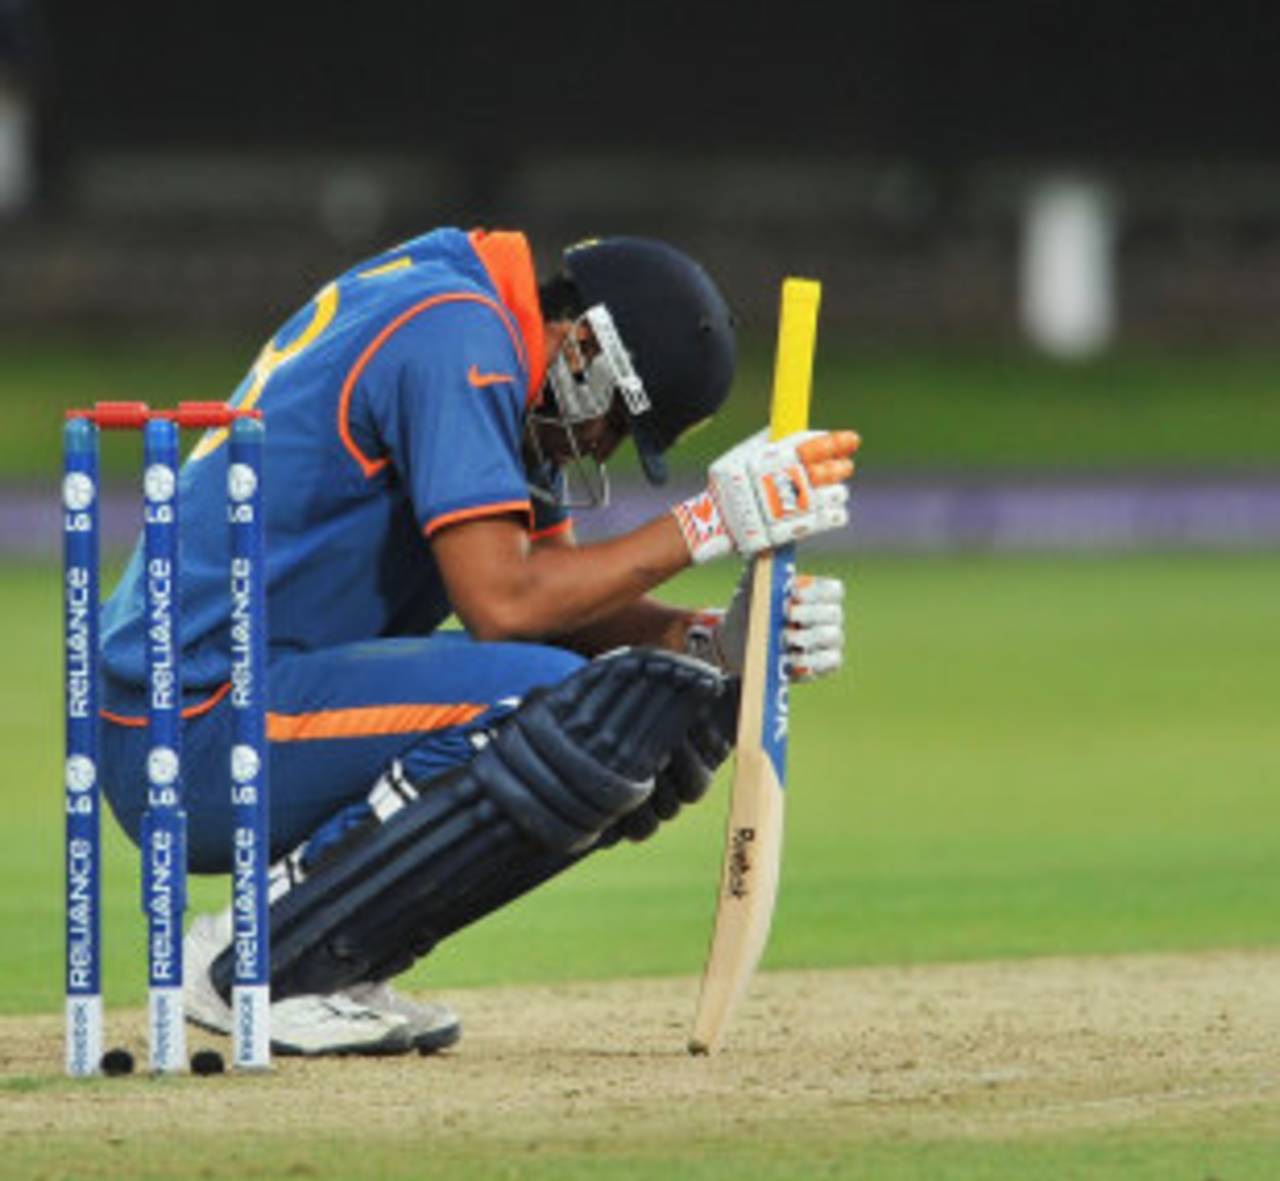 Yusuf Pathan was unable to take India home, England v India, ICC World Twenty20 Super Eights, Lord's, June 14, 2009 